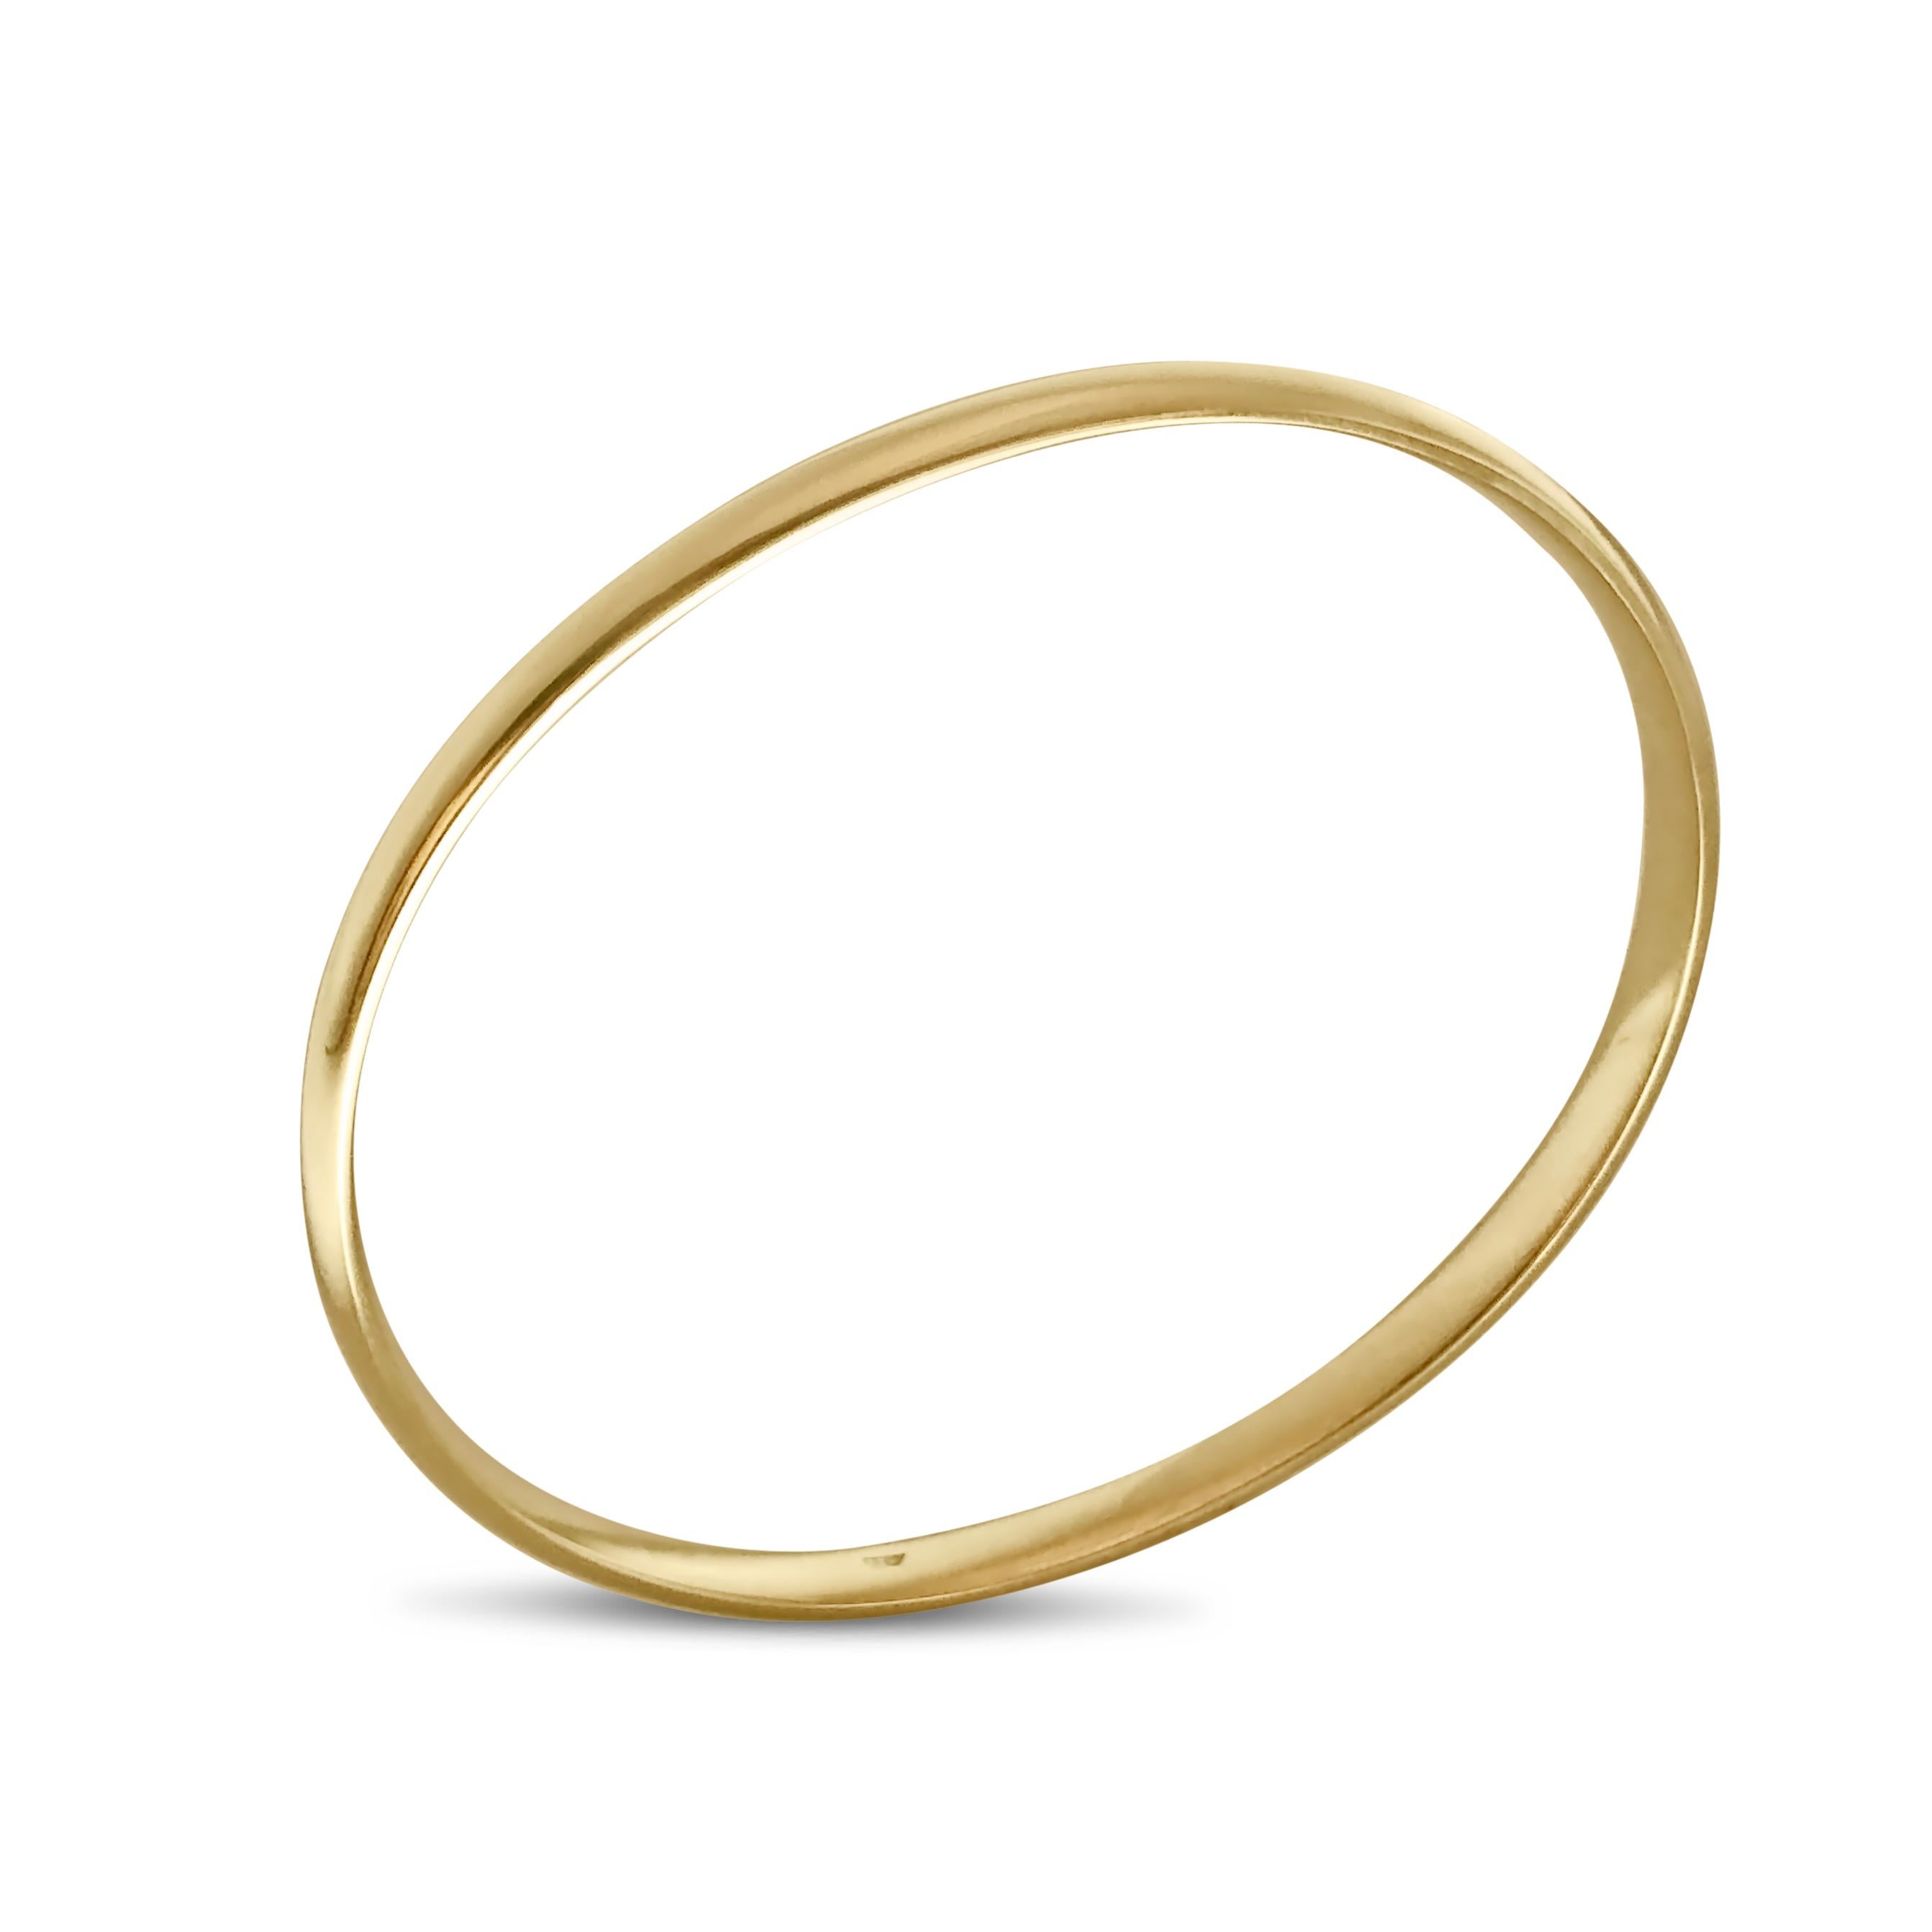 Our chunky oval-shaped, slip-on bangle is cast in 14K yellow gold. At 5mm in width, it’s the perfect ‘casual’ statement piece that is truly timeless with an attitude.

Specifications:
- Shape: Round
- Metal(s): 14K Yellow Gold
- Dimension: 65mm x